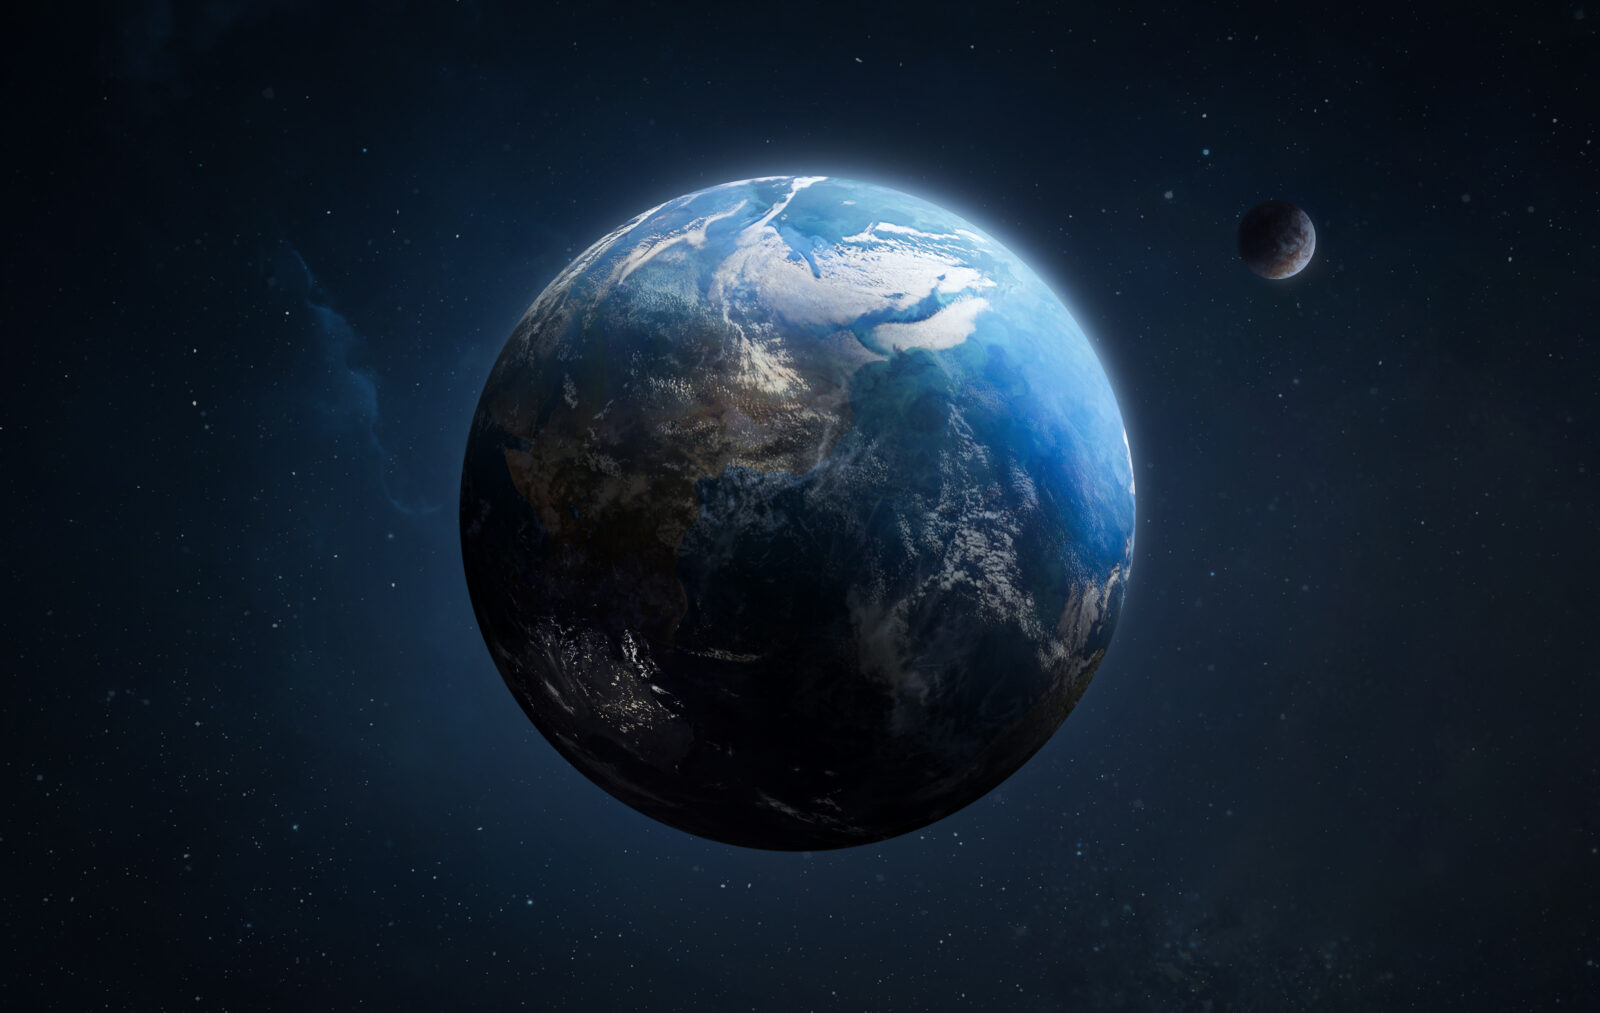 Earth planet in dark outer space on background. High resolution sci-fi wallpaper. Elements of this image furnished by NASA